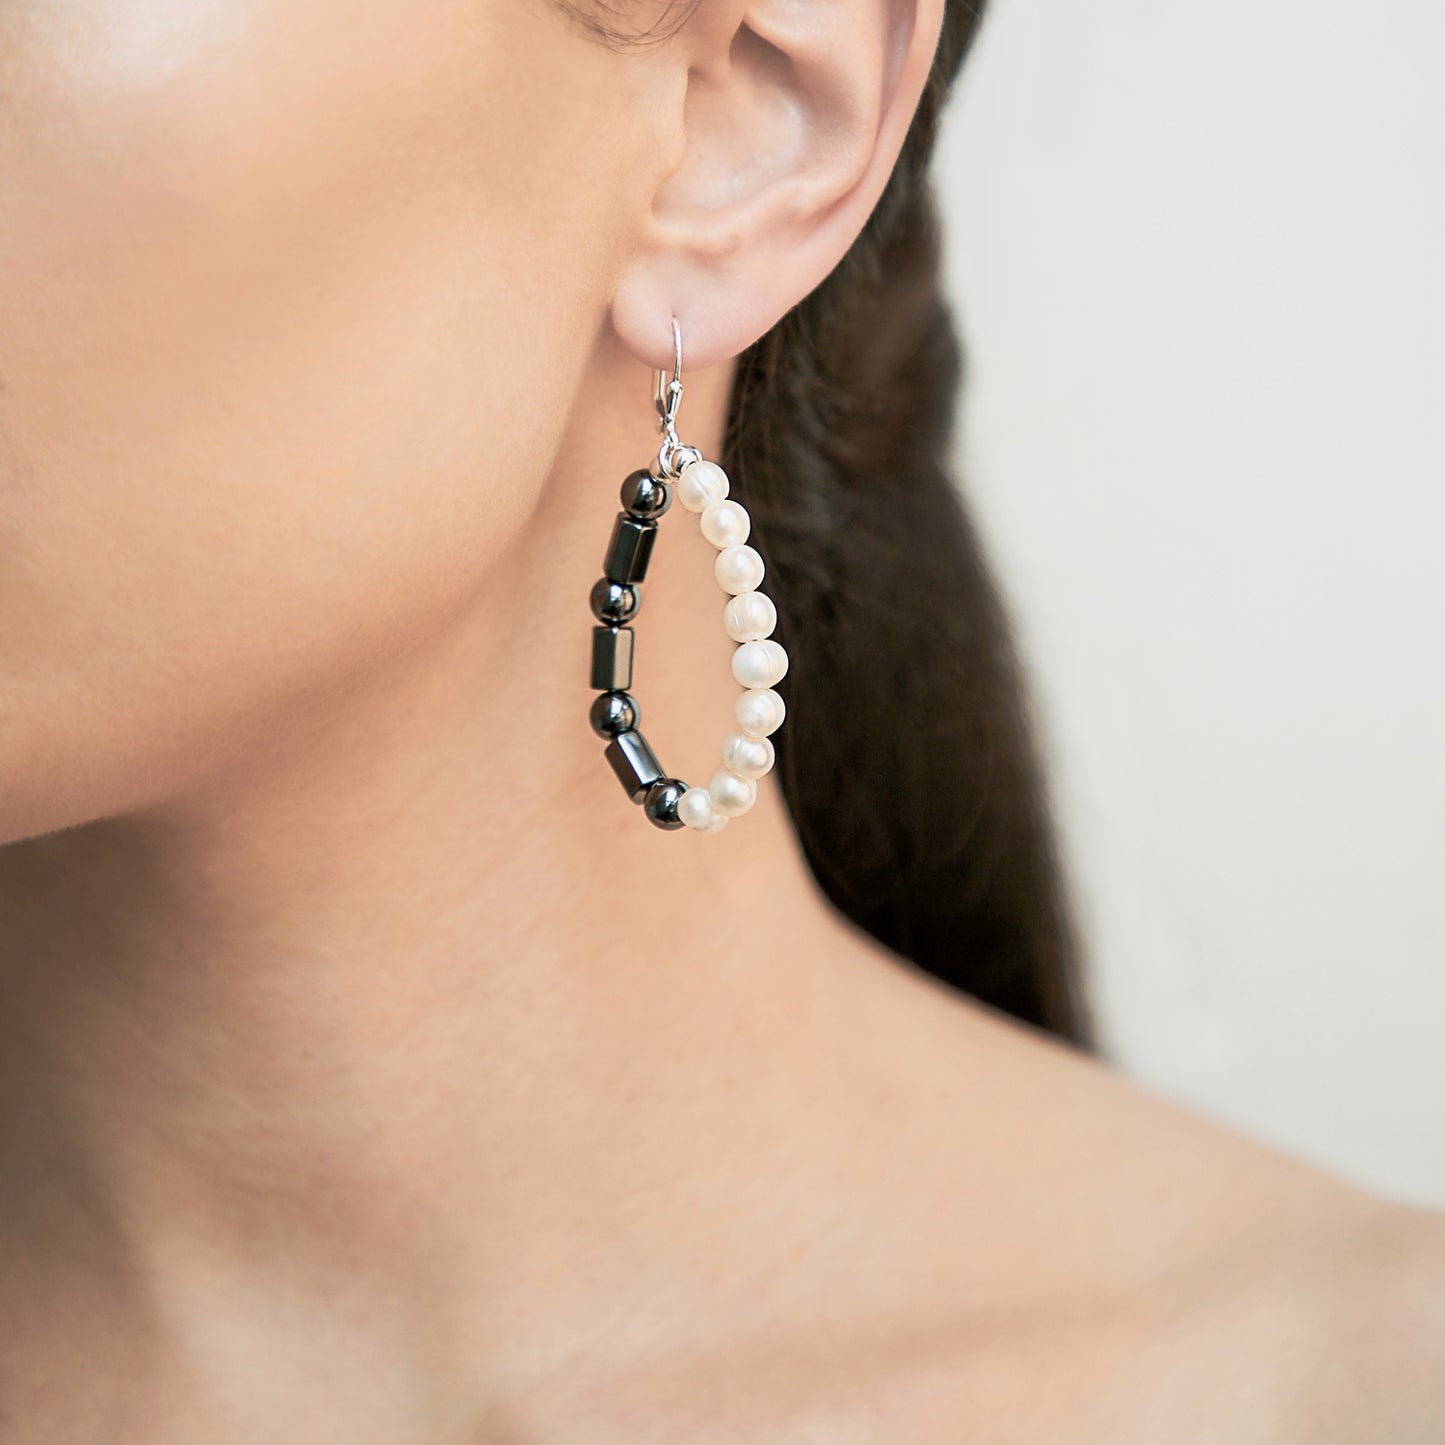 Large Hoop Earrings with Freshwater Pearls and Hematine